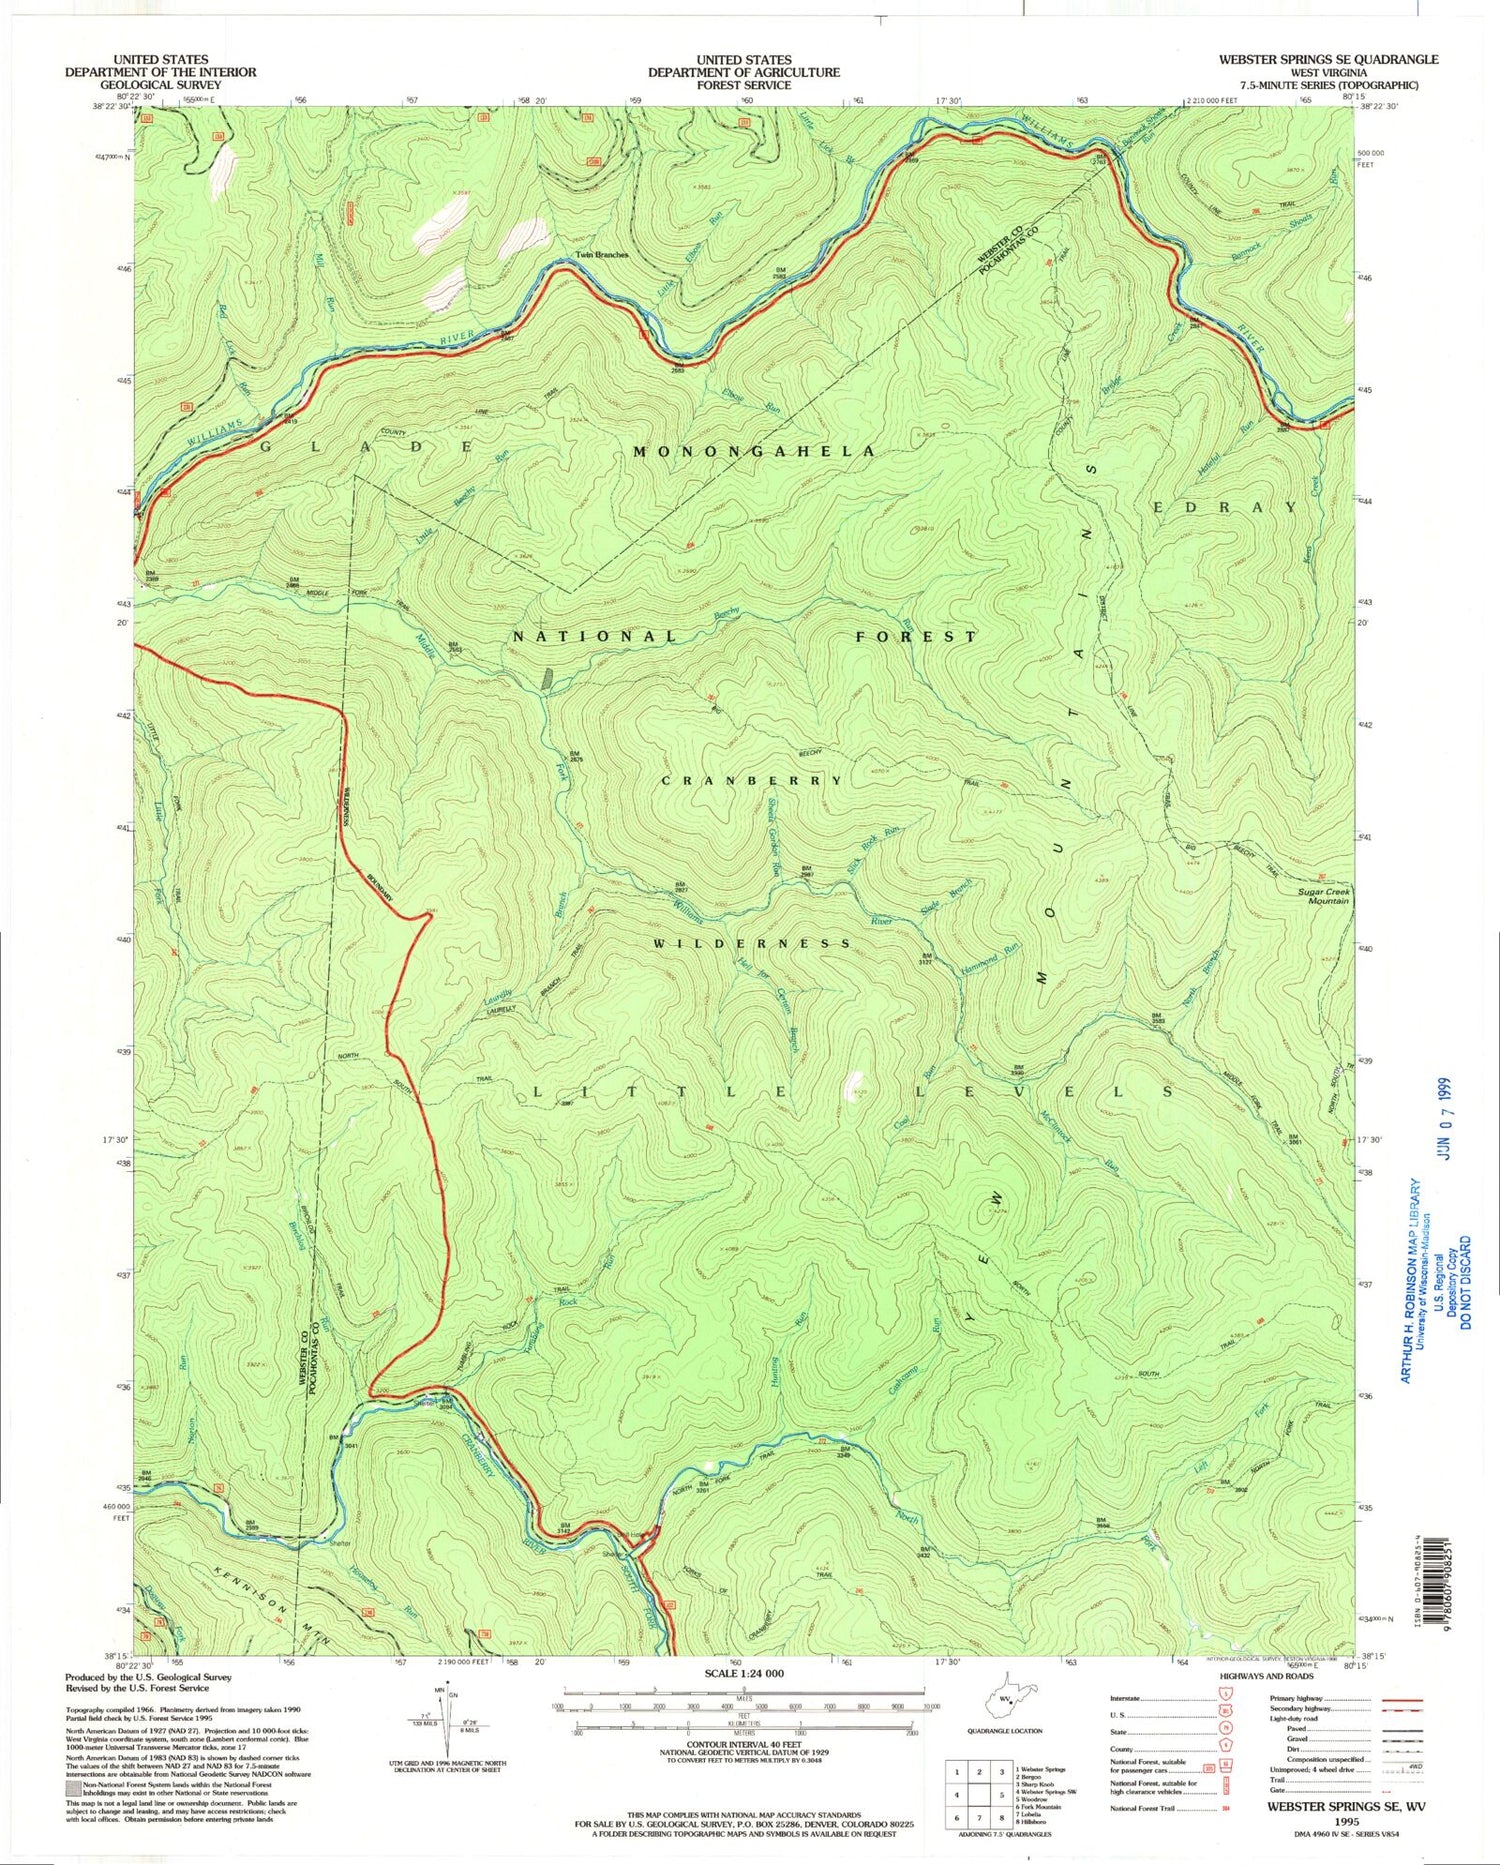 USGS Classic Webster Springs SE West Virginia 7.5'x7.5' Topo Map Image